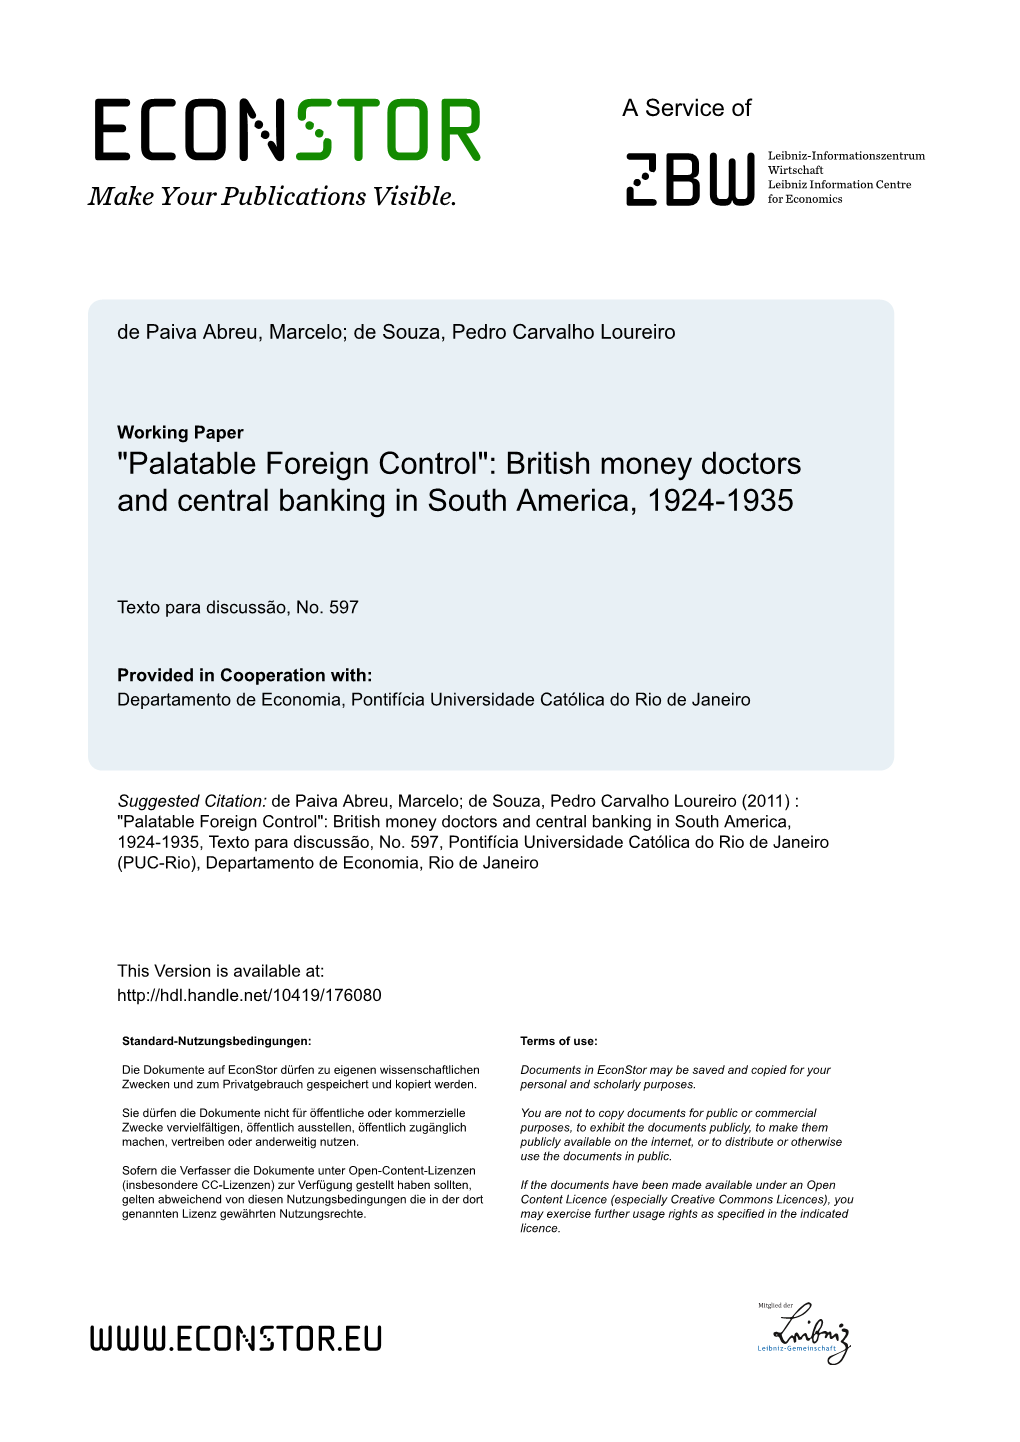 "Palatable Foreign Control": British Money Doctors and Central Banking in South America, 1924-1935